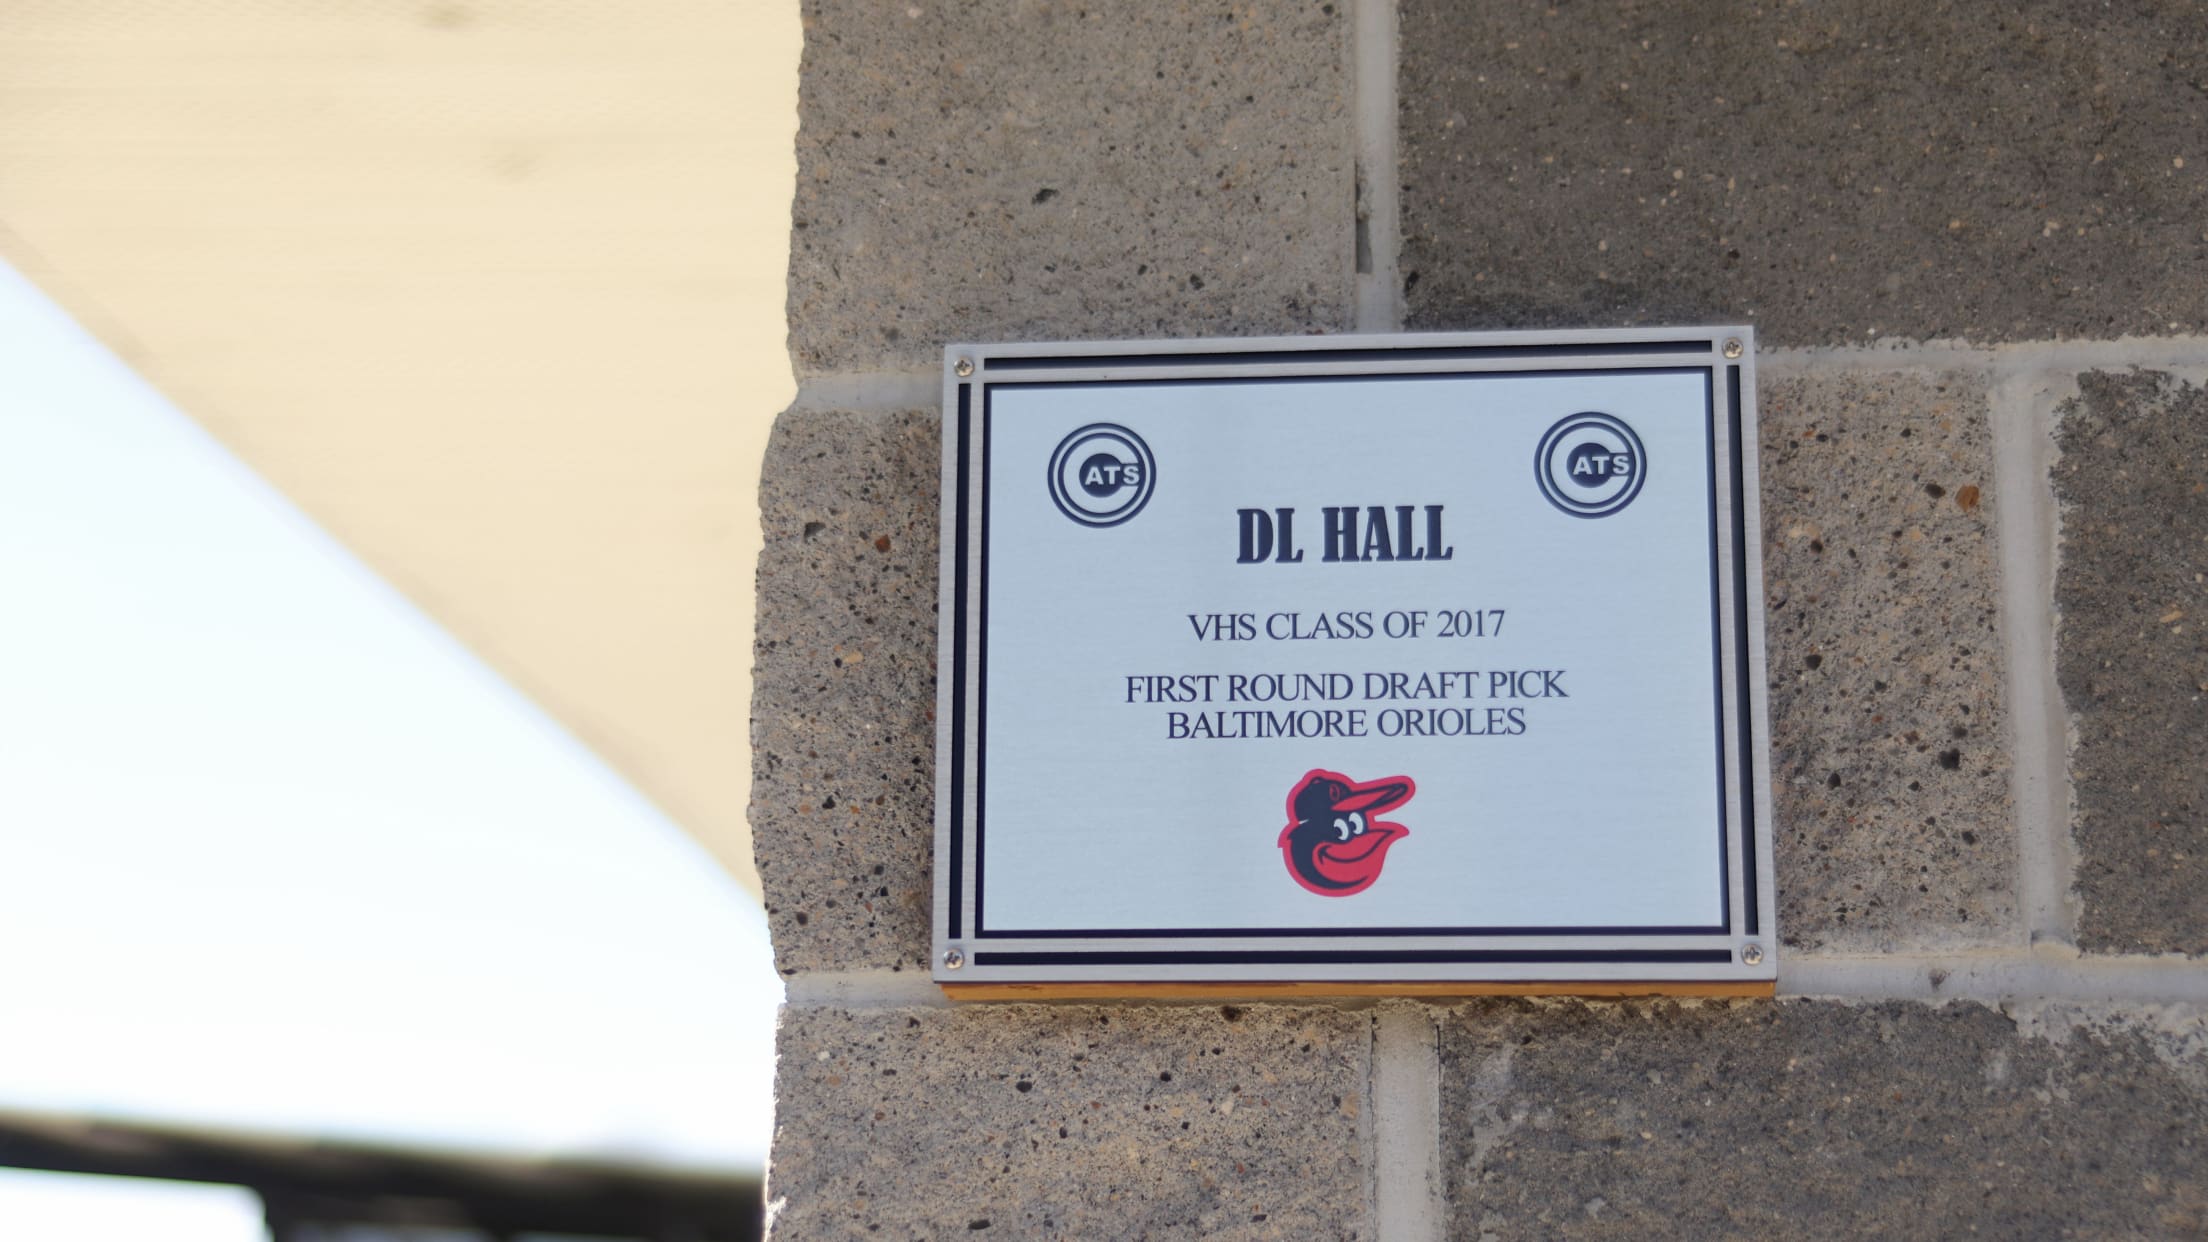 Hall's professional baseball plaque featured on the concession stand at the Valdosta Wildcat baseball stadium.